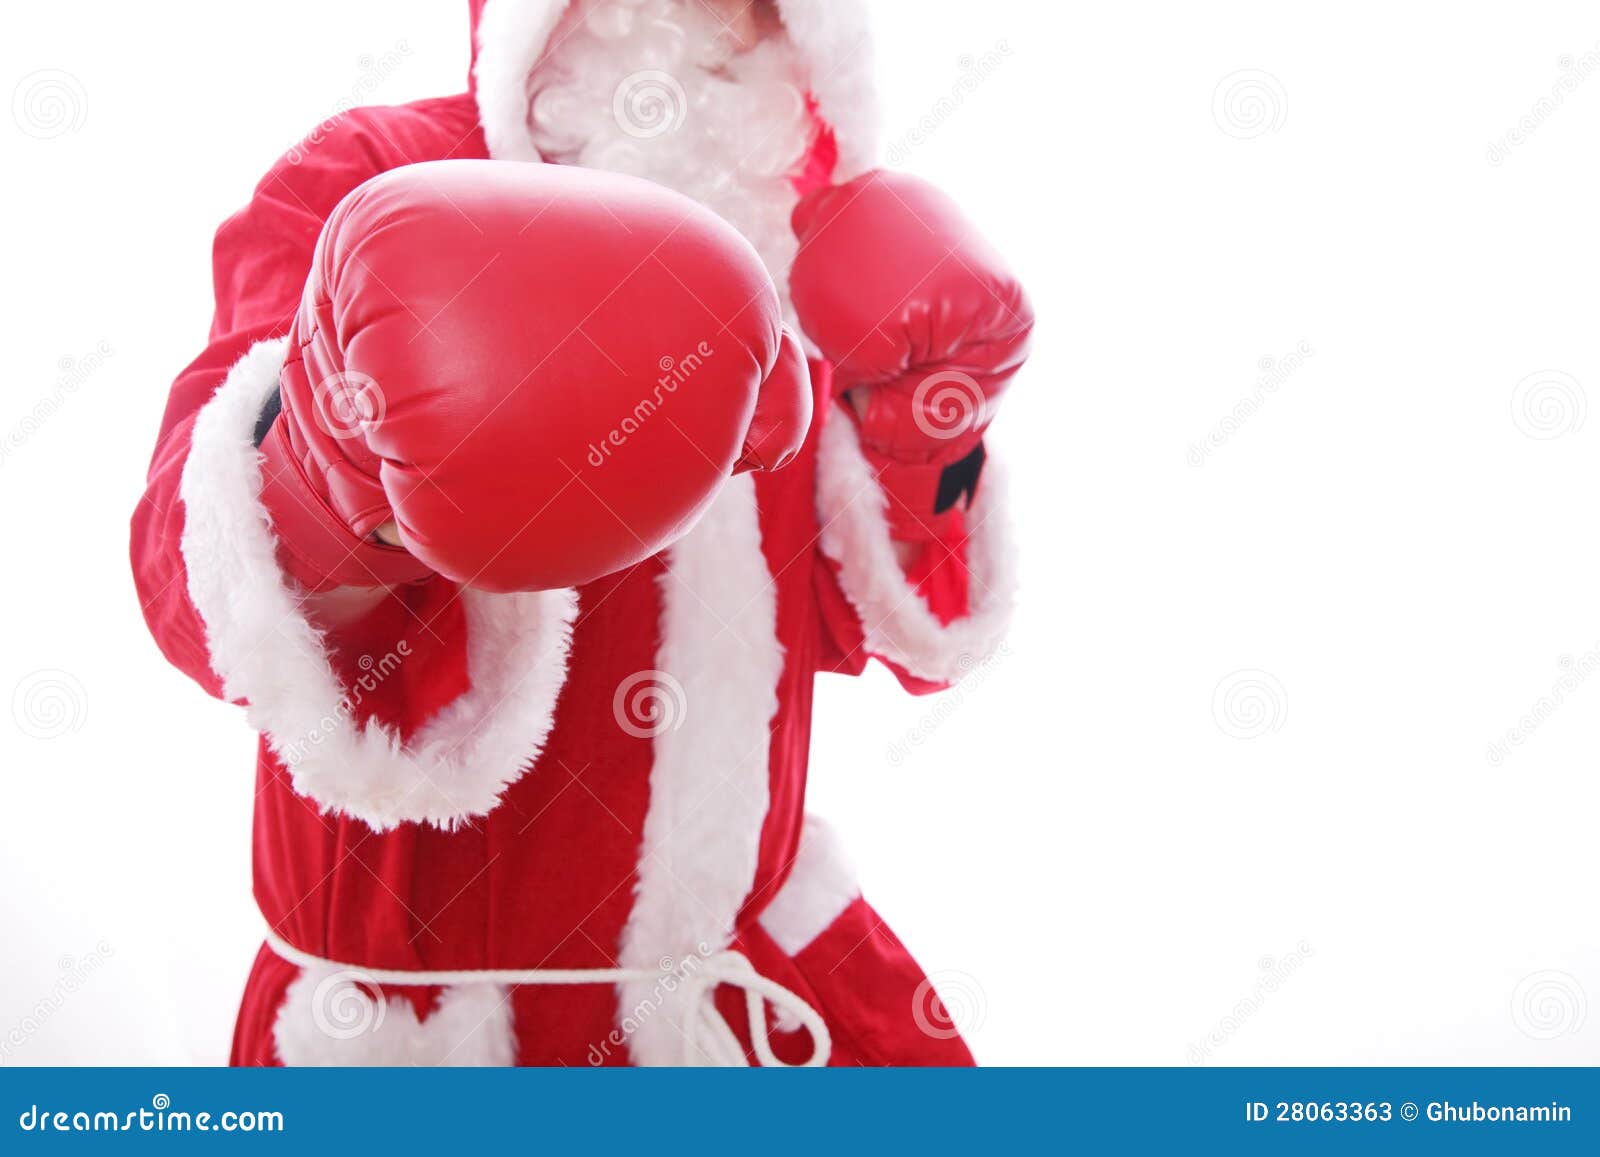 6 Day Christmas Boxing Workout for Beginner